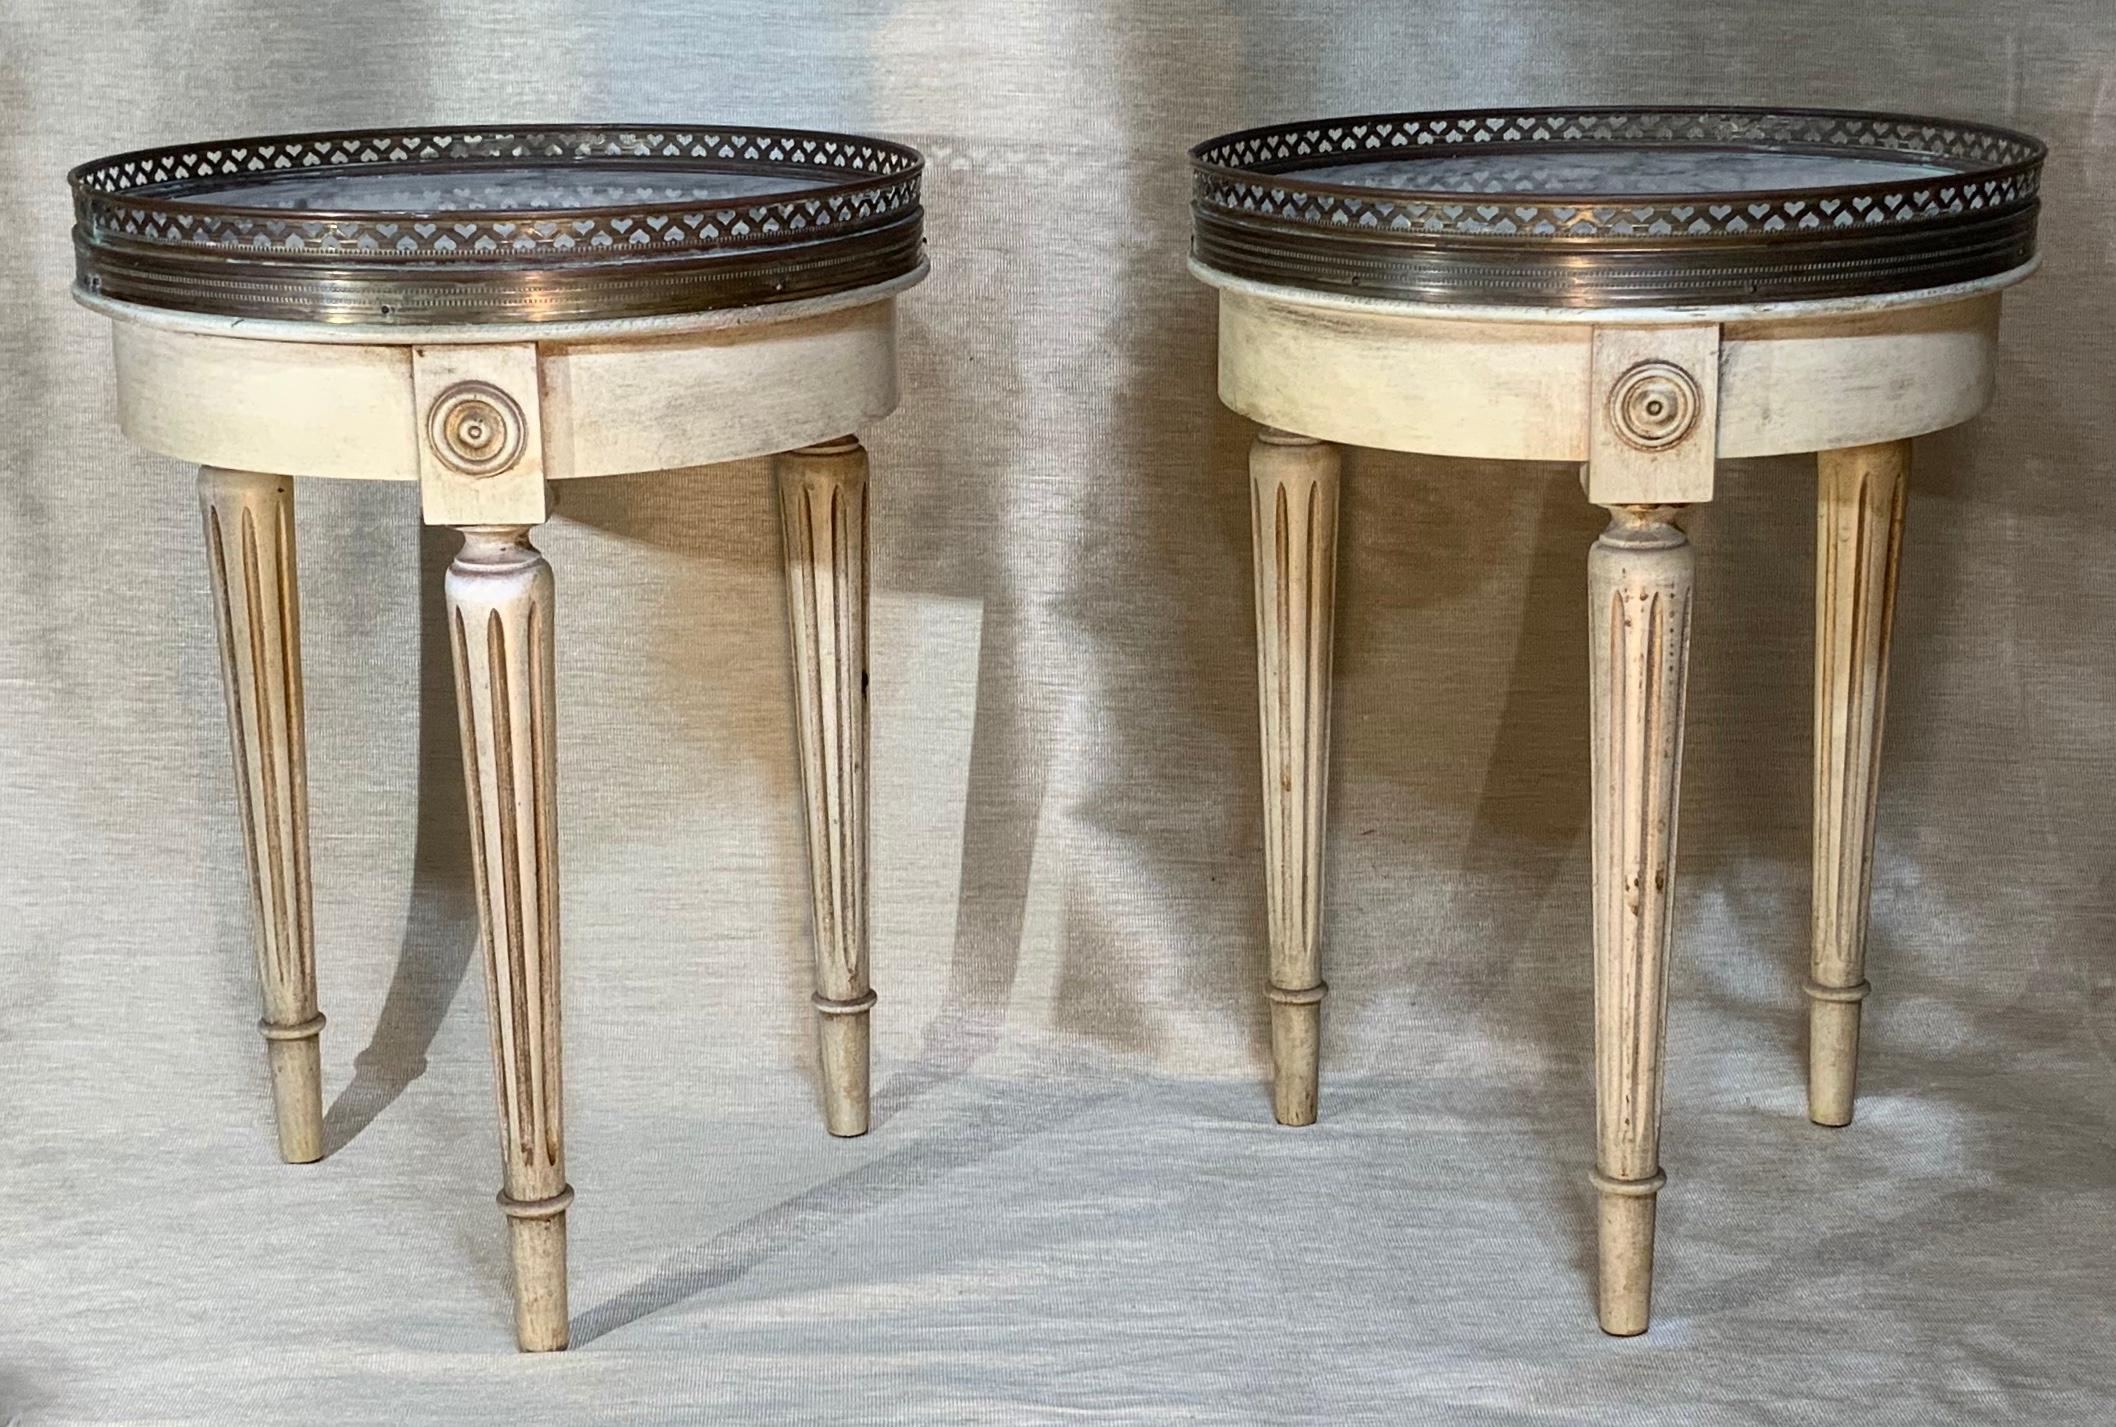 Elegant pair of vintage side tables made of three legs carved wood, white -gray marble top surrounded with decorative Brass trimming.